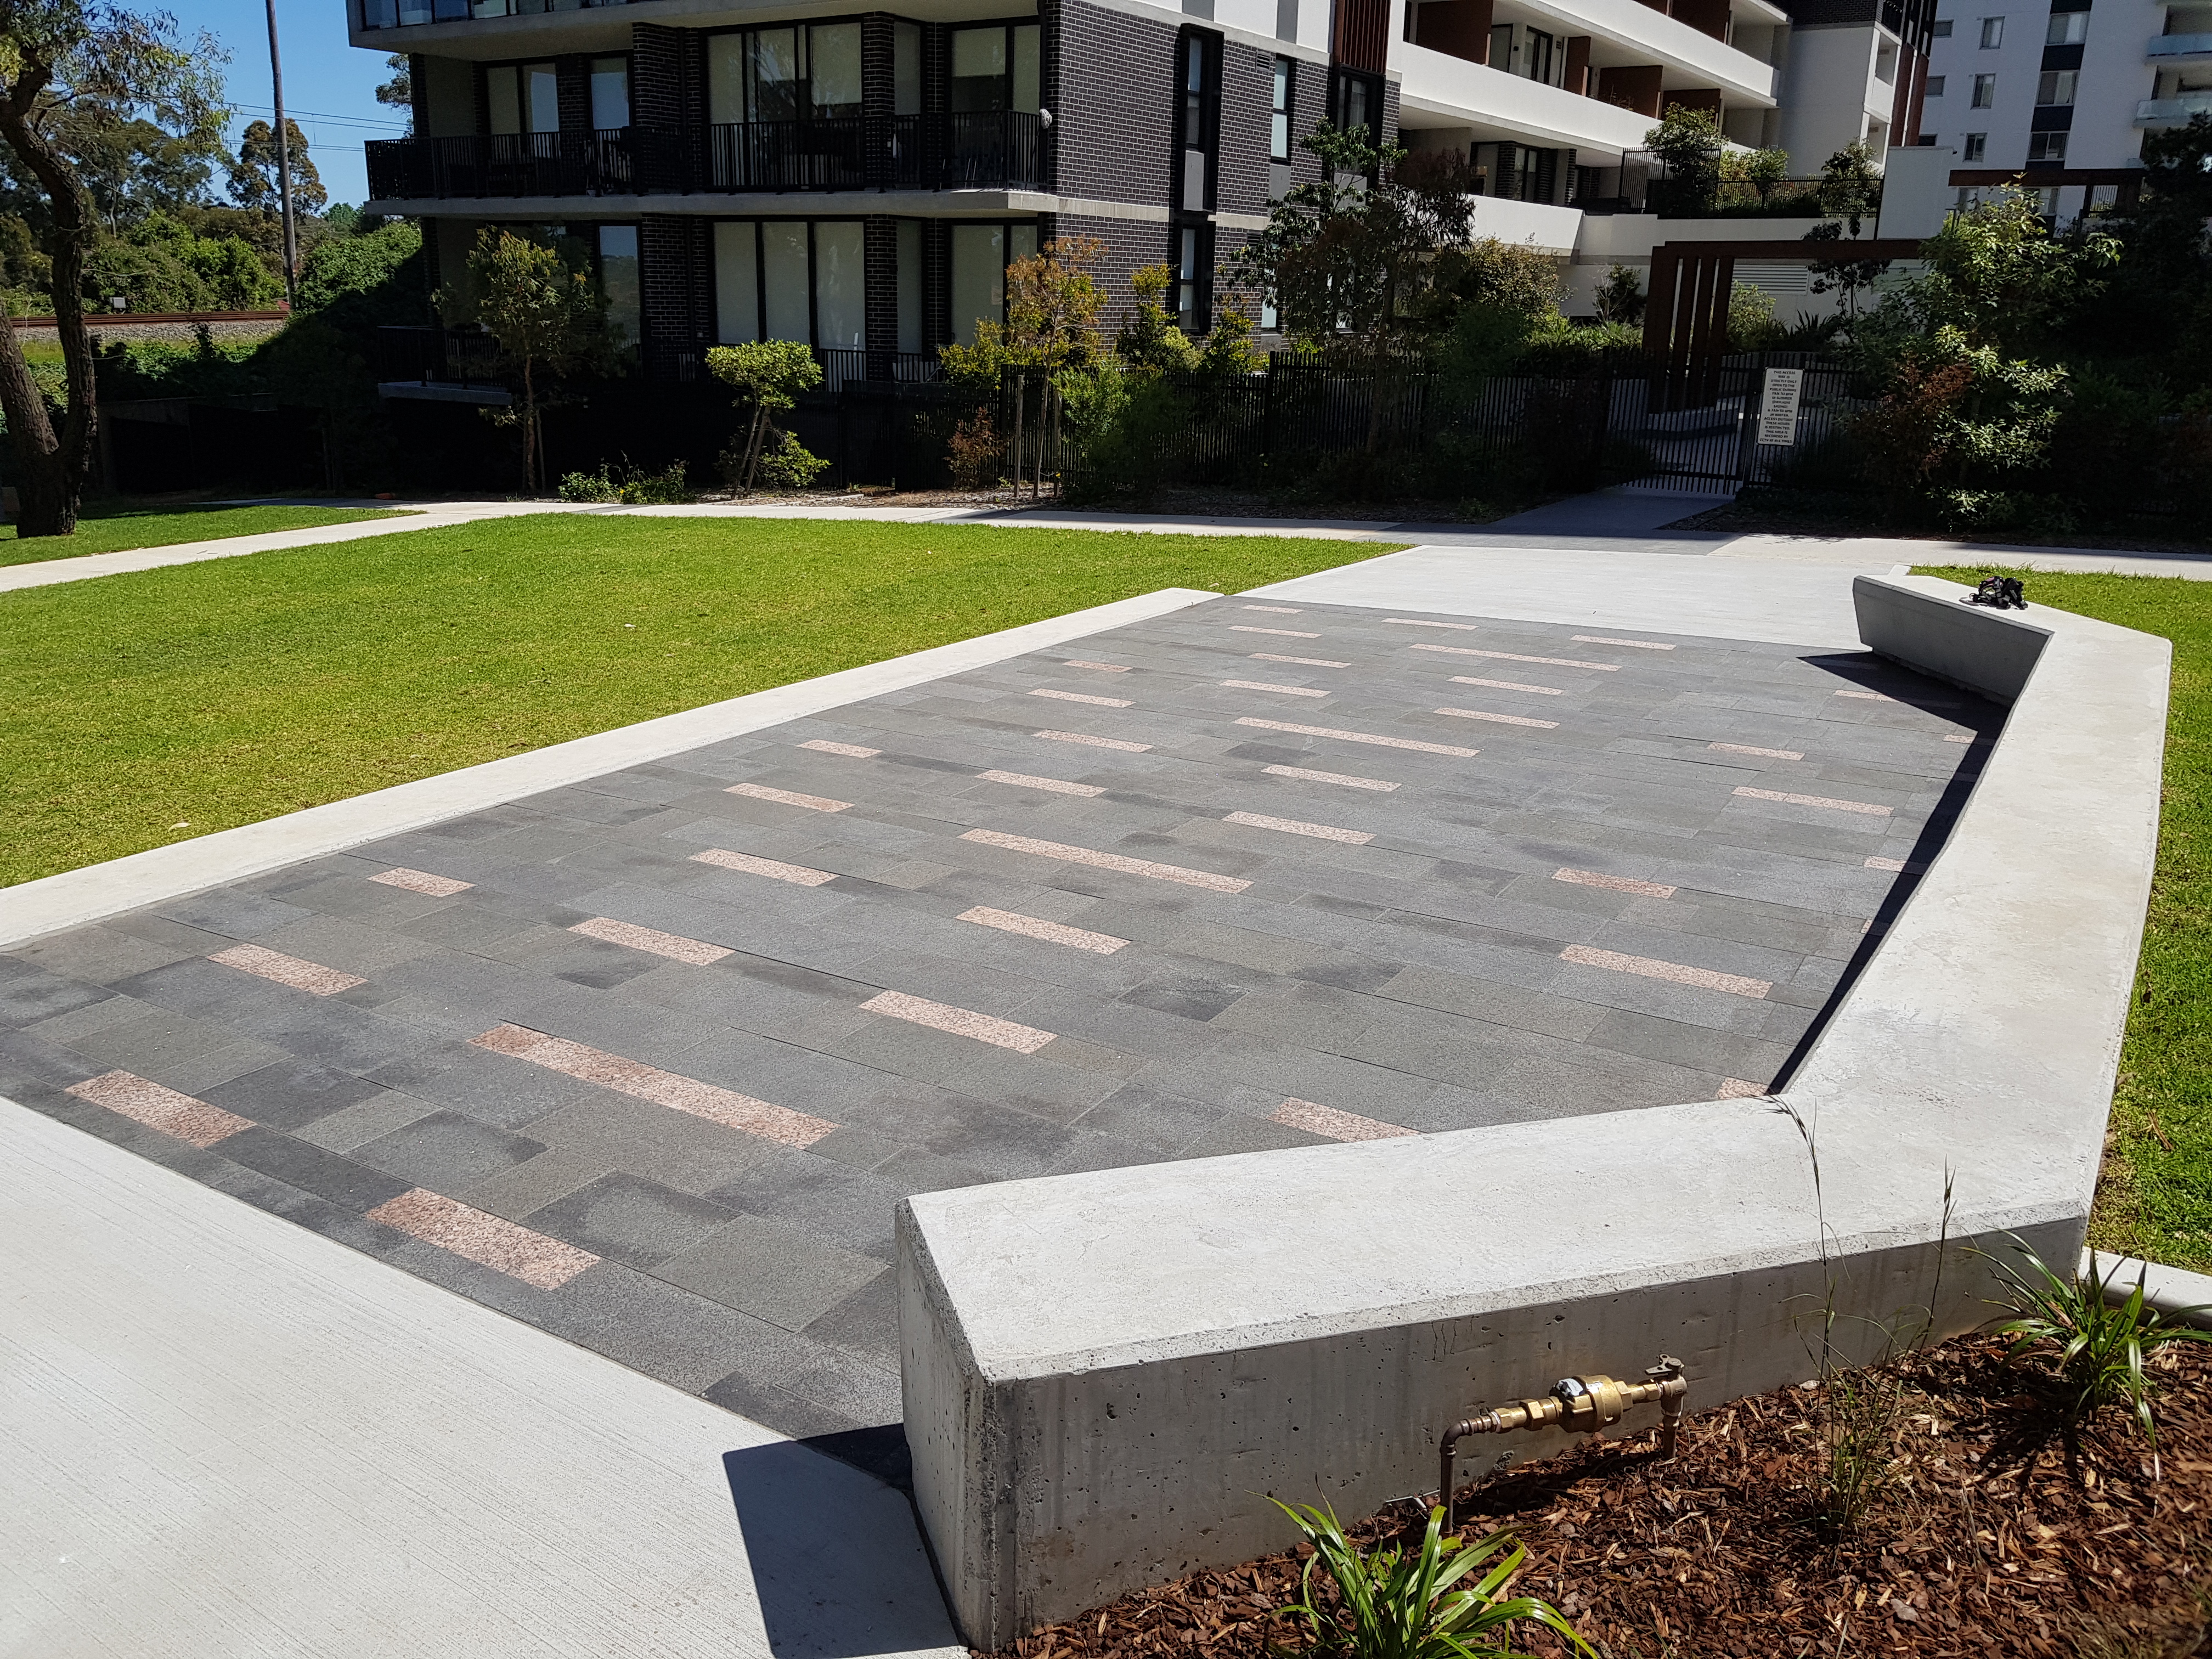 Park with accessible paved area